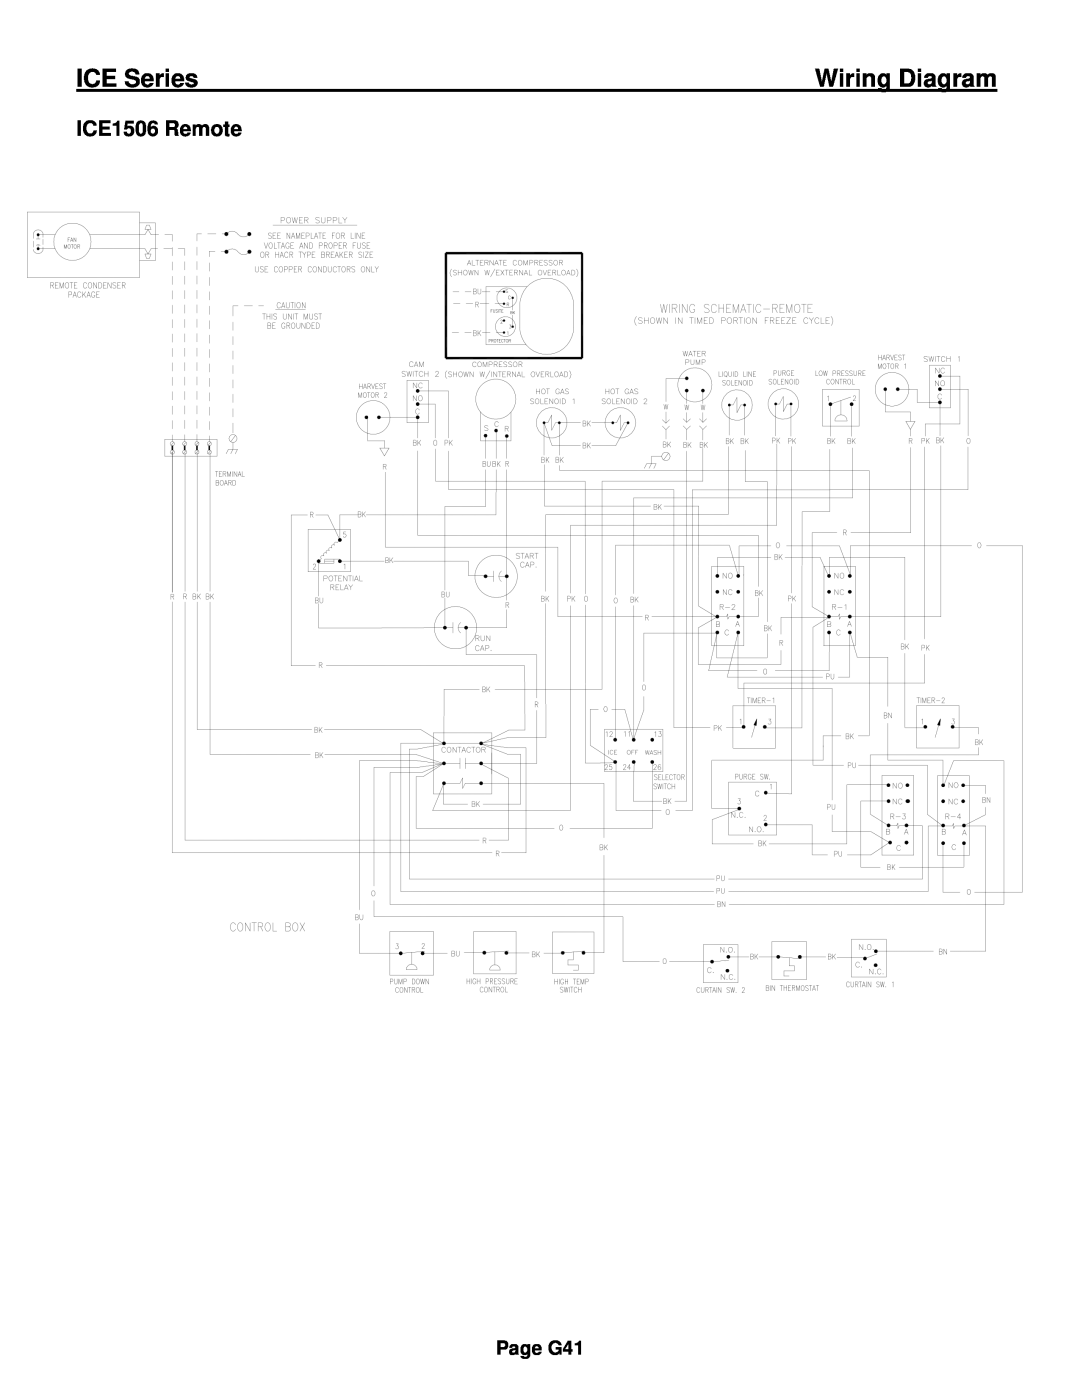 Ice-O-Matic ICE0250 Series installation manual ICE1506 Remote, ICE Series, Wiring Diagram, Page G41 